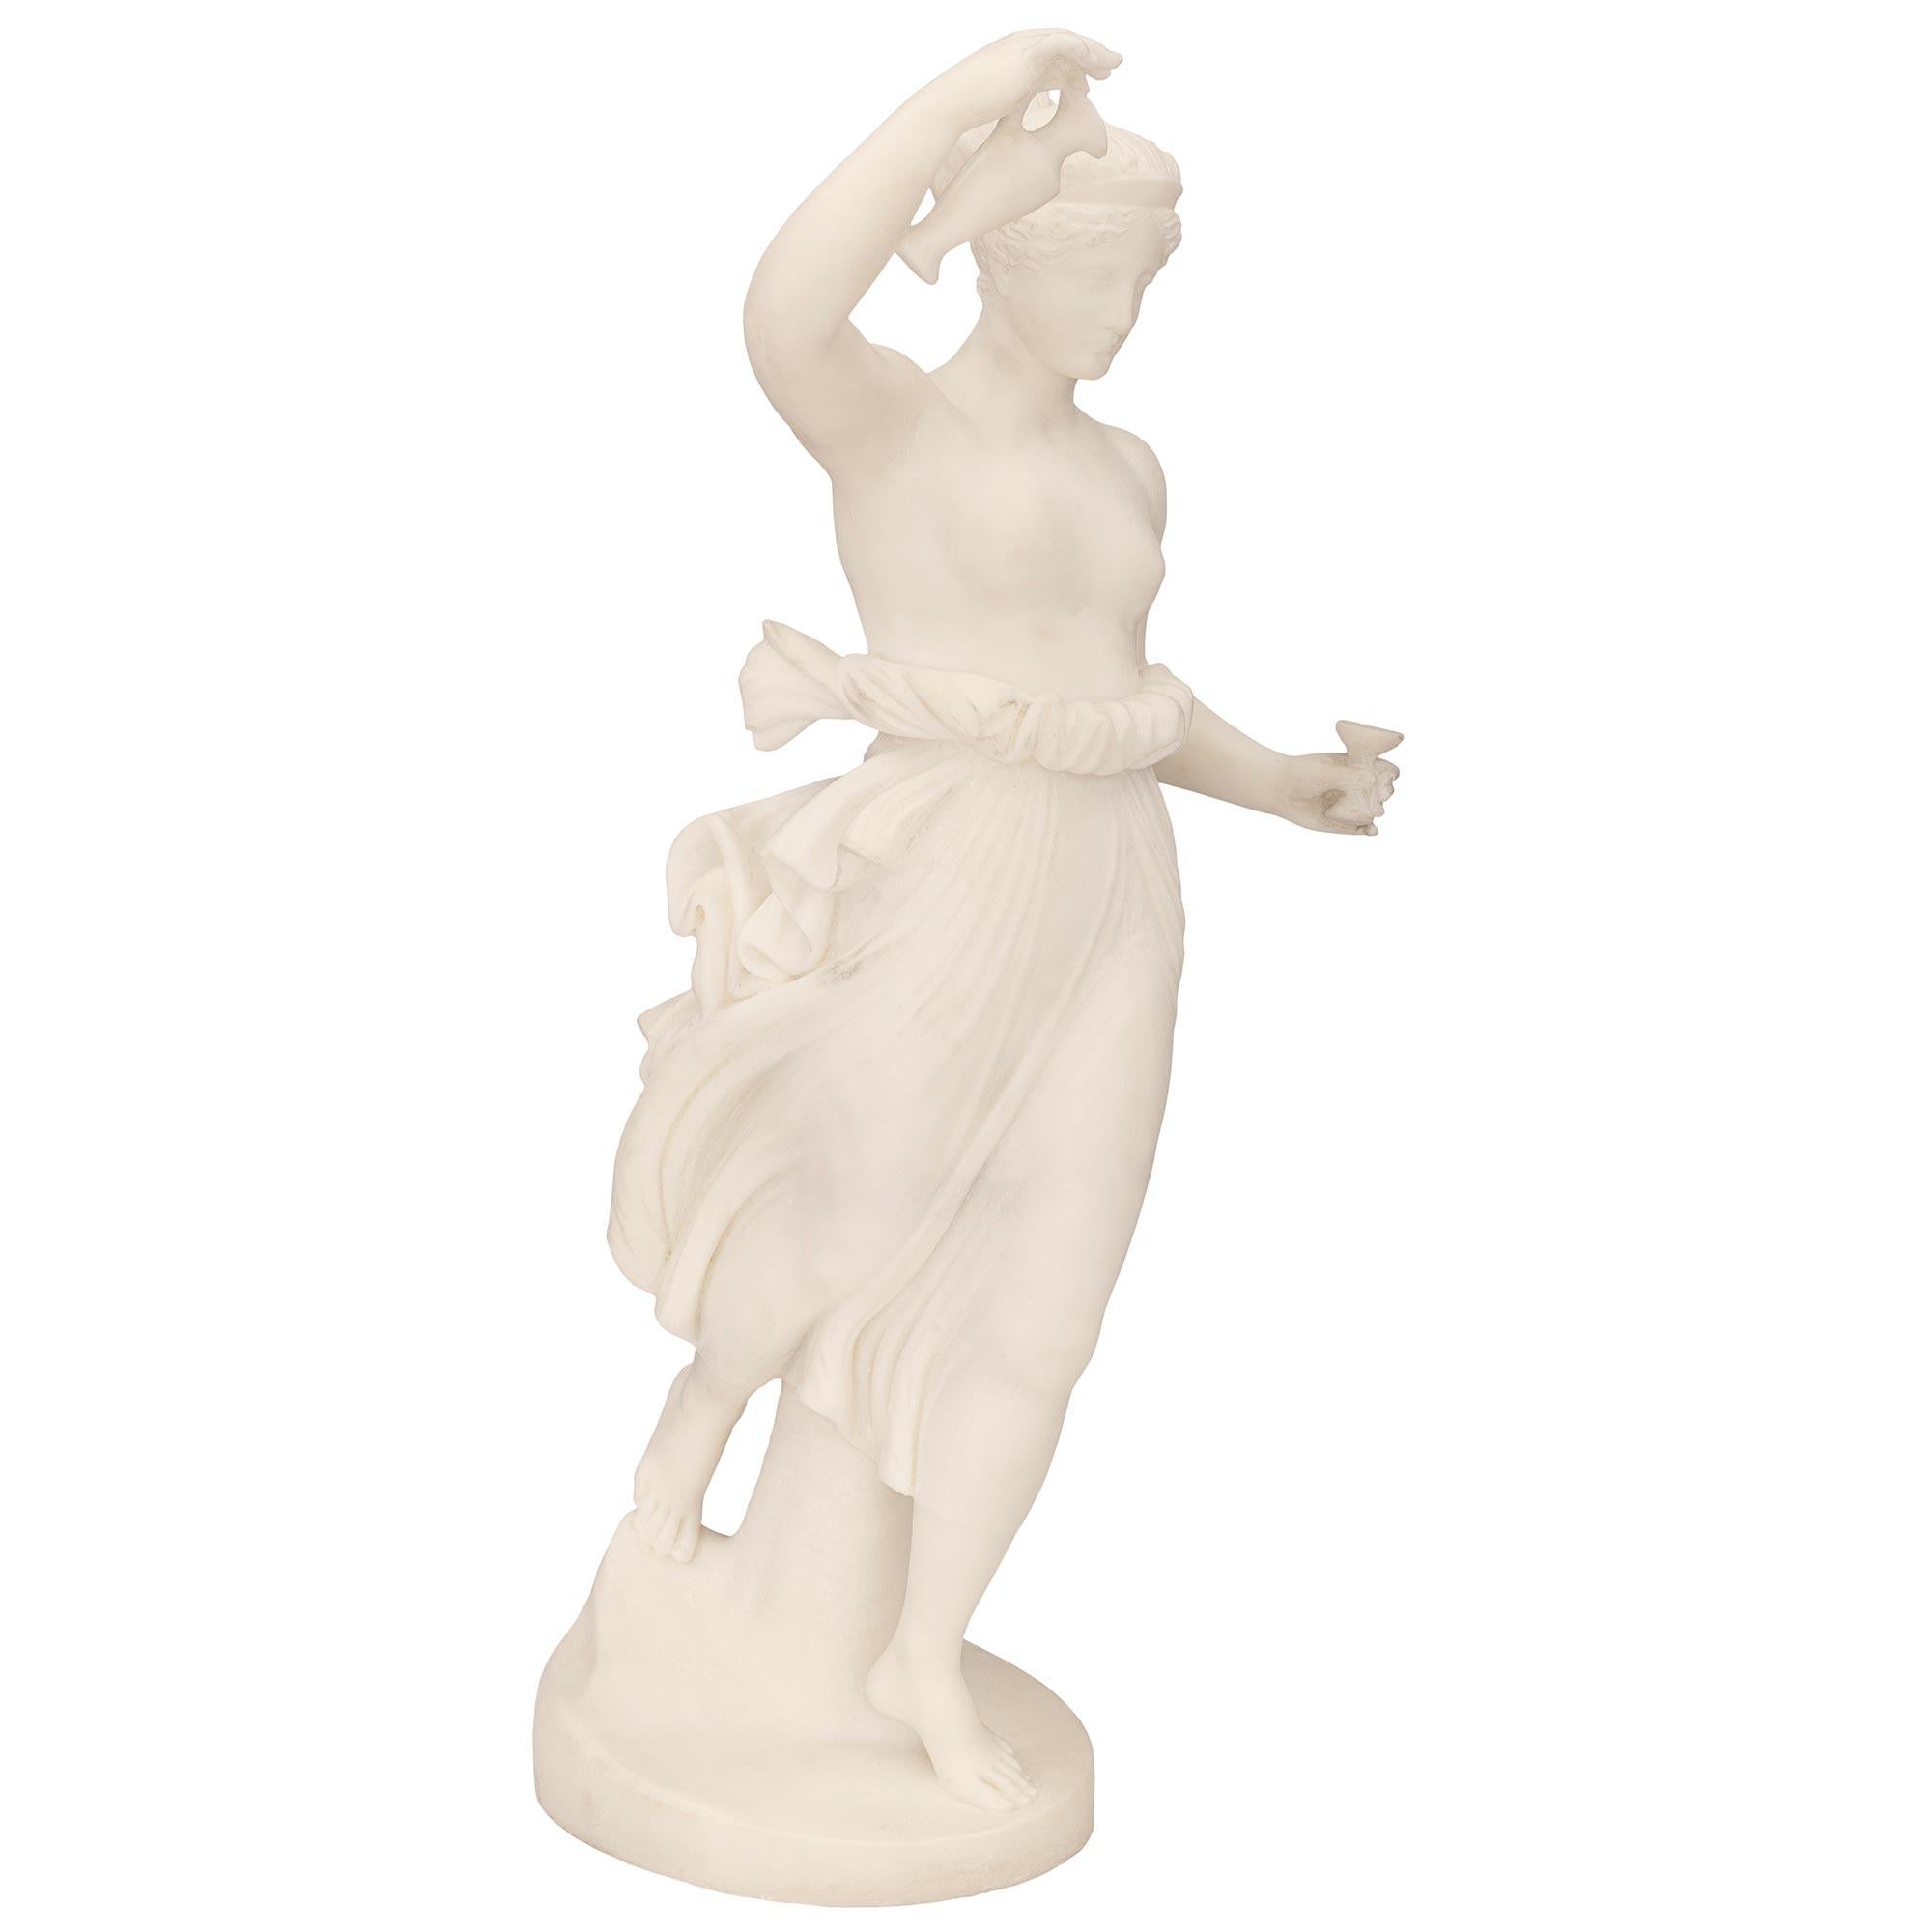 A beautiful and high quality Italian 19th century white Carrara marble statue of Hebe. The statue is raised by a circular base where the beautiful Hebe is standing barefoot in front of a tree trunk. She is wearing her hair in an updo and is draped